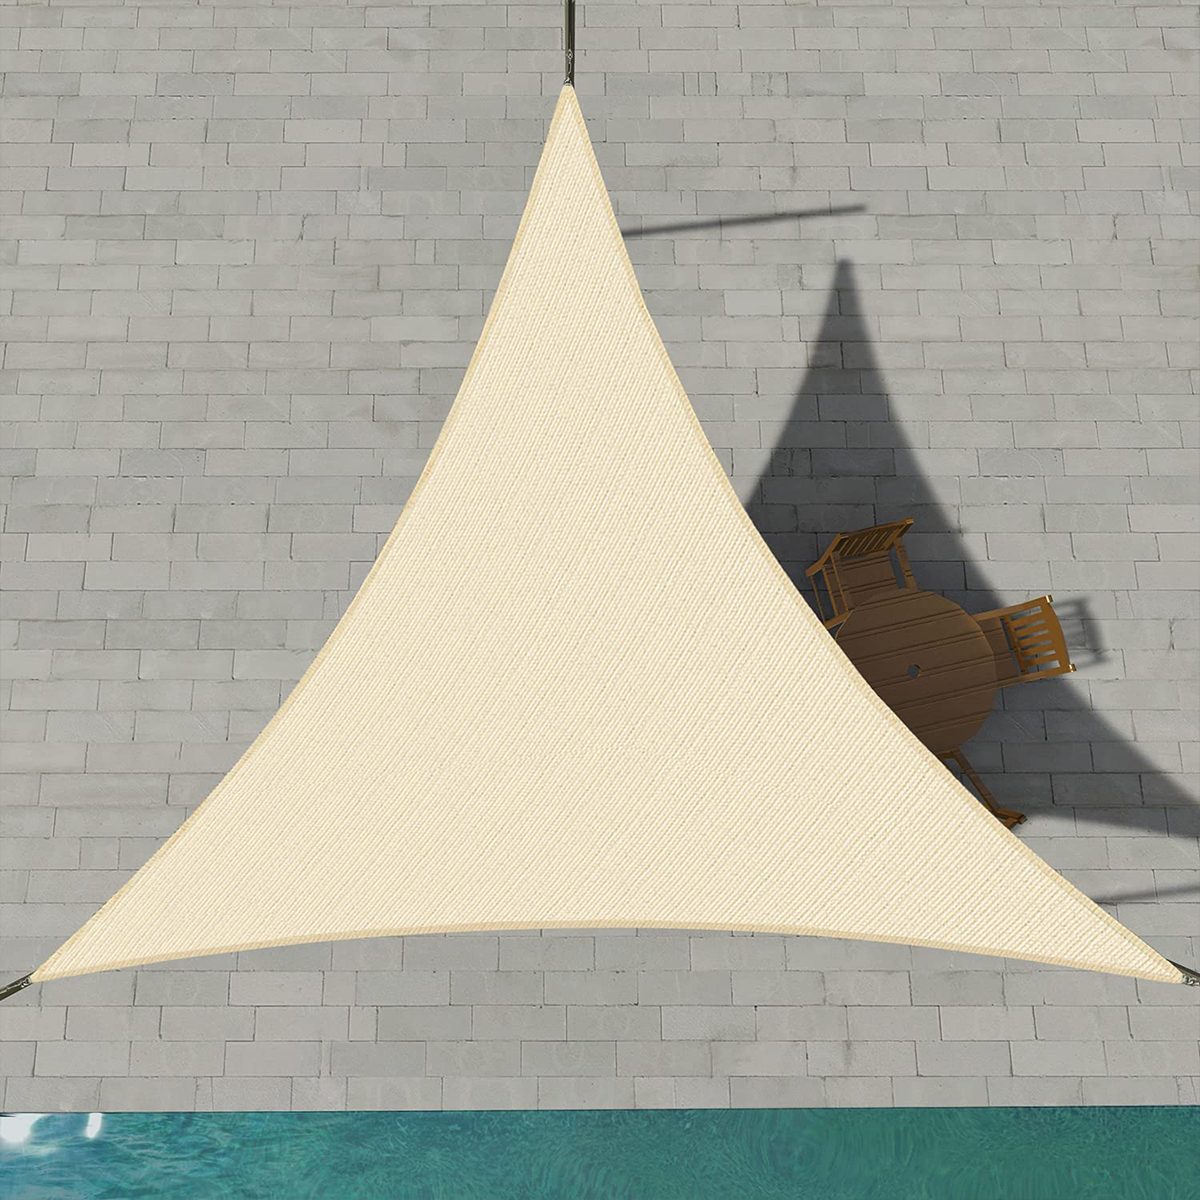 <h3 class="">Patio Paradise Triangle Shade Sail</h3> <p>For those looking to add some shade to a small patio or that awkward corner of their deck, the <a href="https://www.amazon.com/dp/B01N1YNUUC" rel="noopener">triangle shade sail</a> is a solid option. It can also provide shade for a <a href="https://www.familyhandyman.com/project/how-to-build-a-covered-sandbox/" rel="noopener noreferrer">kid's sandbox</a> area. The triangle shape allows for versatile placement, and the petite size (available as small as 2 feet by 2 feet) makes it easy to hang up on your own. Available in several colors and patterns, it's made of high-density polyethylene, which is knitted instead of woven, allowing heat and humidity to rise through the fabric and reducing ambient air temperatures below.</p> <p><strong>Pros</strong></p> <ul> <li class="">Available in 42 size options, including small ones</li> <li>Had double-layer webbing to prevent tearing</li> <li class="">Comes in 11 colors and patterns</li> </ul> <p><strong>Cons</strong></p> <ul> <li class="">Installation kit sold separately</li> </ul> <p class="listicle-page__cta-button-shop"><a class="shop-btn" href="https://www.amazon.com/dp/B01N1YNUUC">Shop Now</a></p>